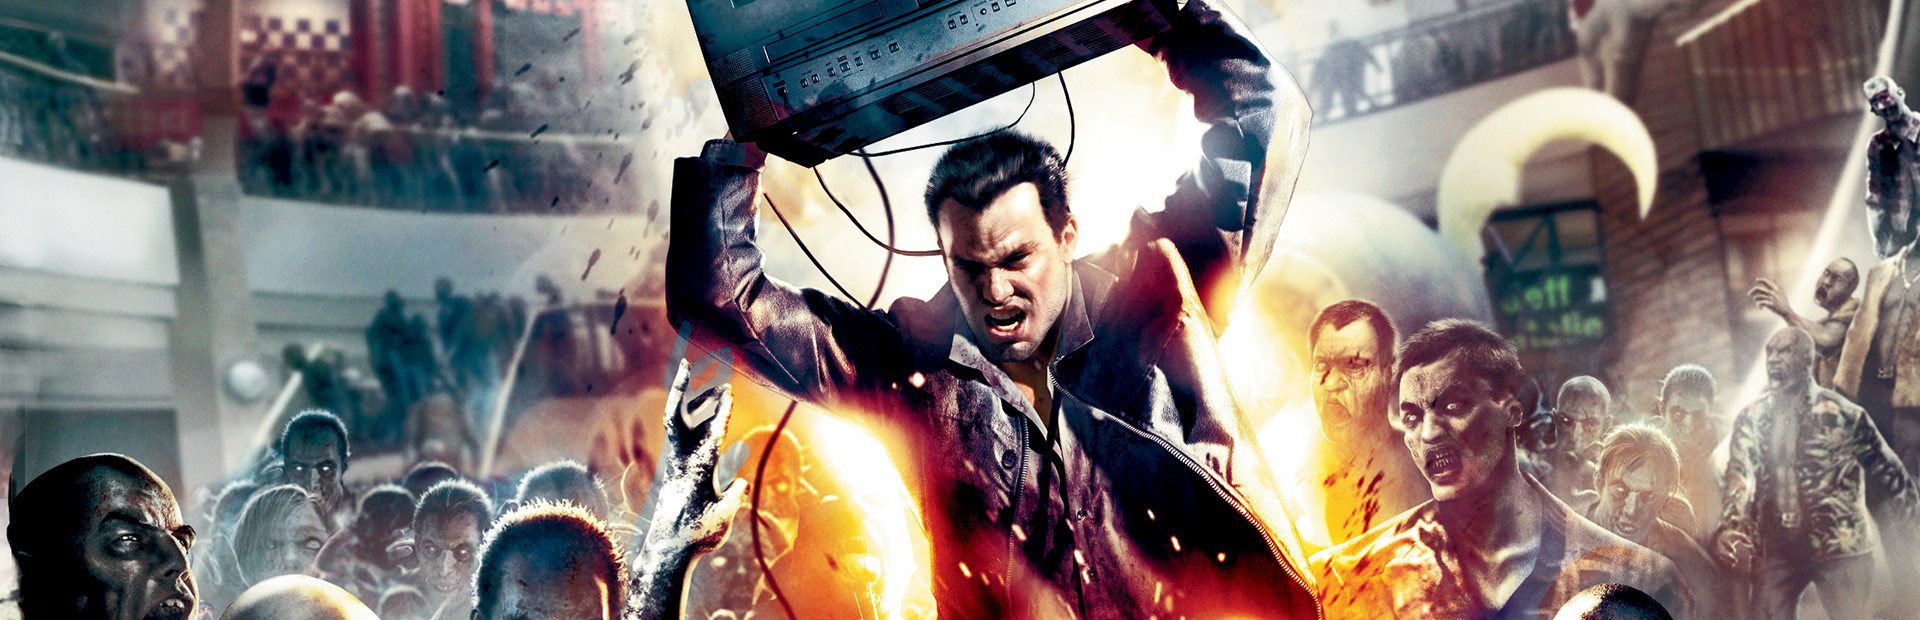 Dead Rising cover image